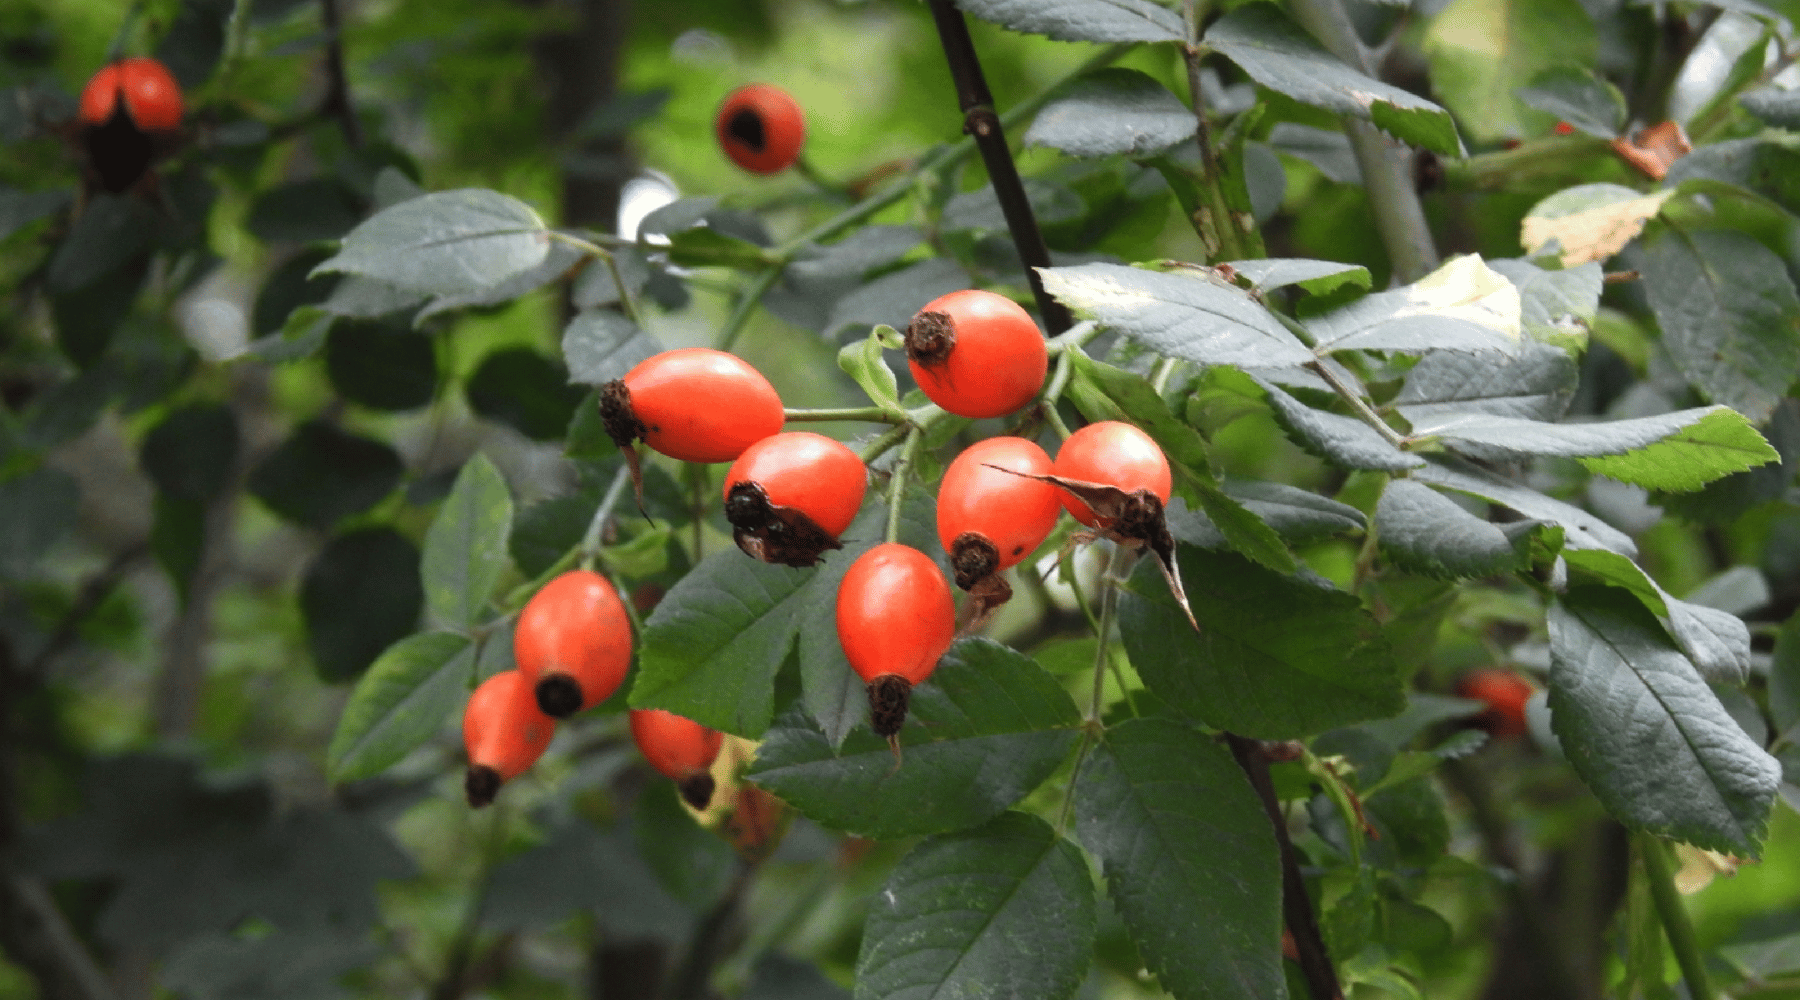 Wild rosehips growing on a leafy branch